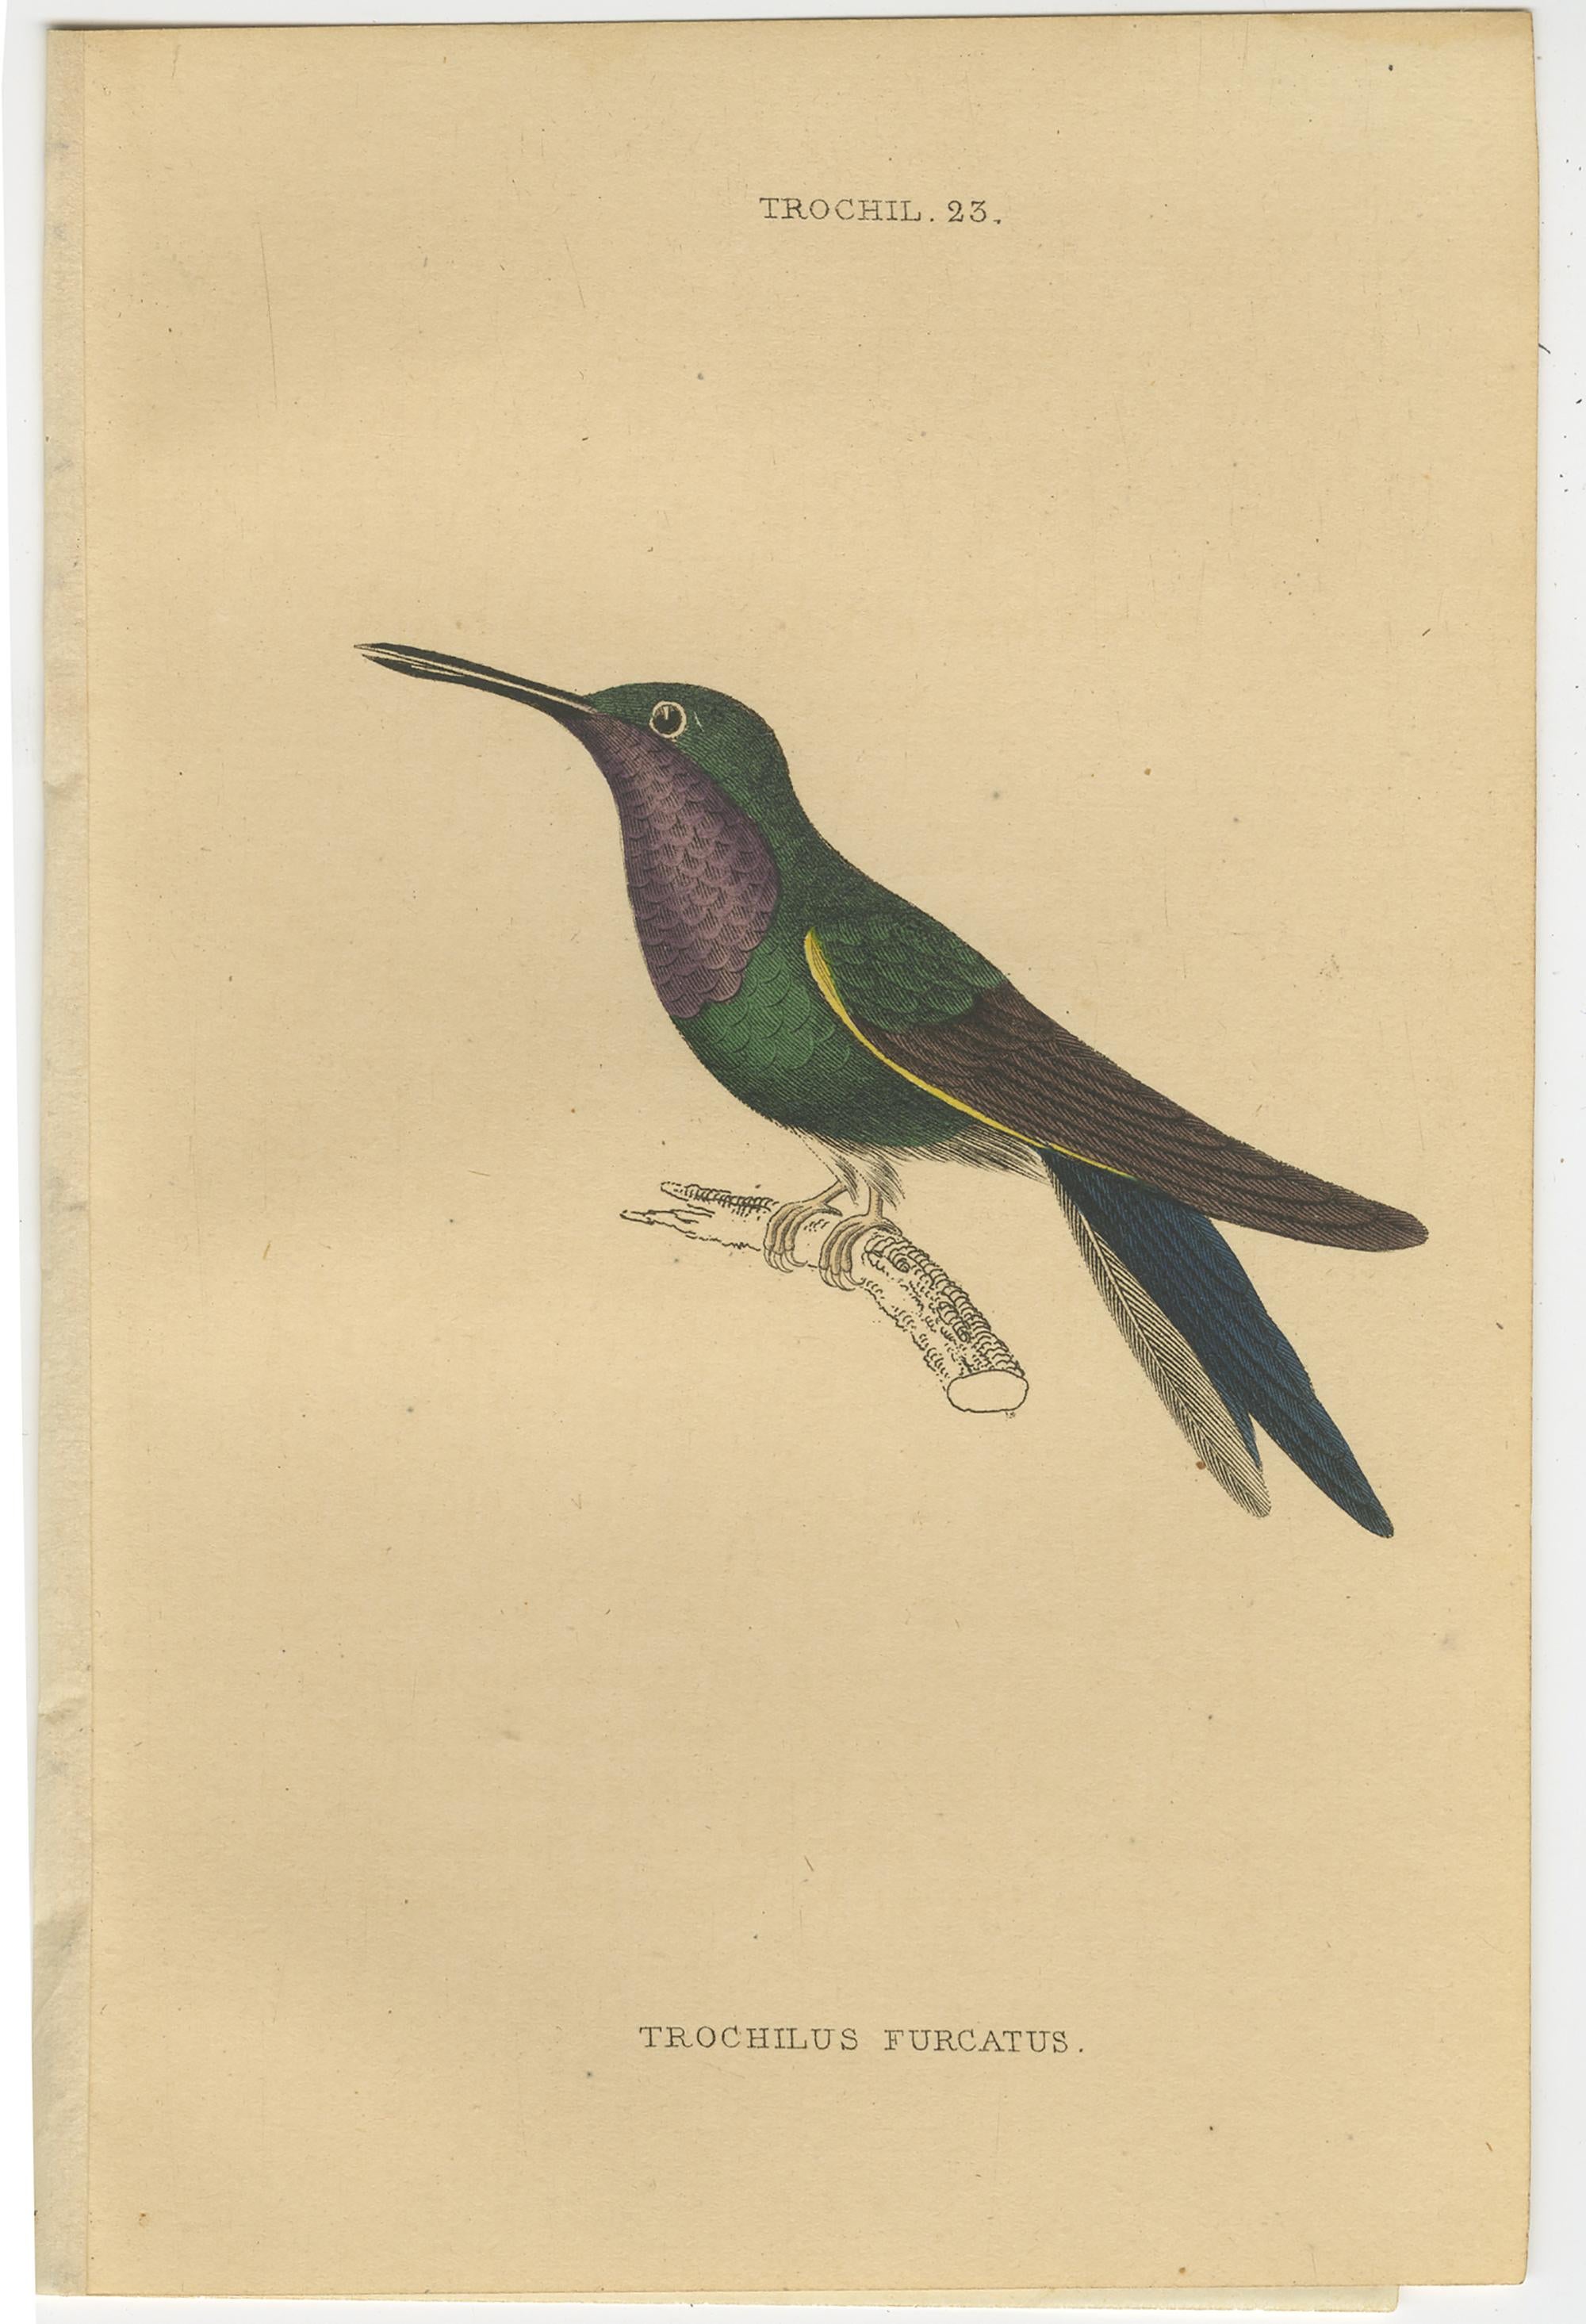 Set of seven antique bird prints. It shows the violet forked-tailed hummingbird (Trochilus Furcatus), cora hummingbird (Trochilus Cora), Dupont's hummingbird (Trochilus Dupontii), sapphire-throated hummingbird (Trochilus Saphirinus), white-eared